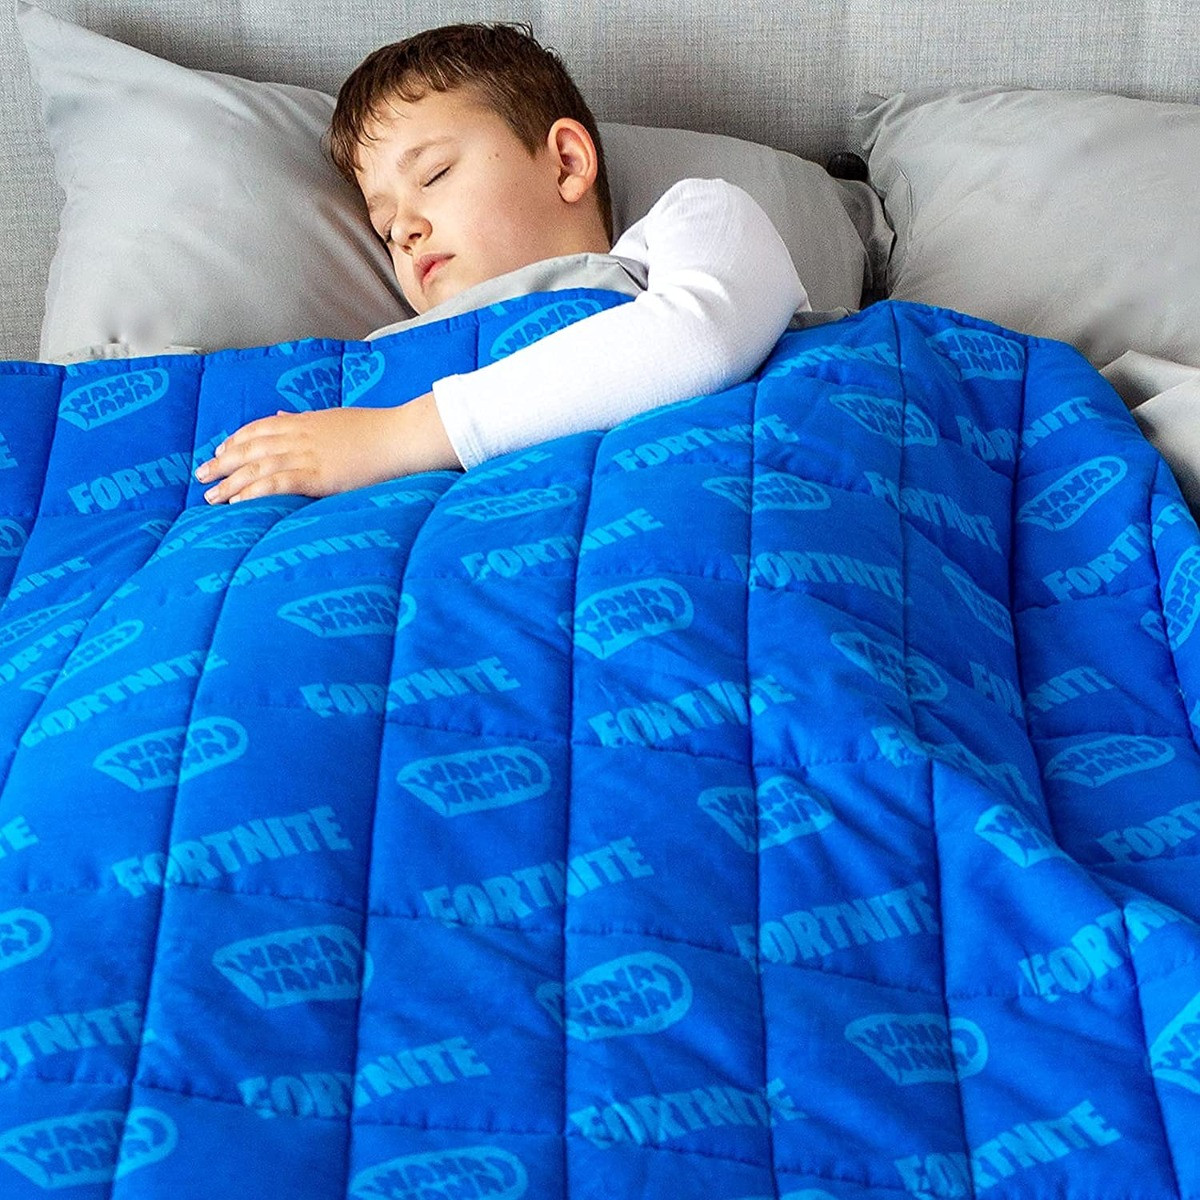 Fortnite Weighted Blanket - Blue>